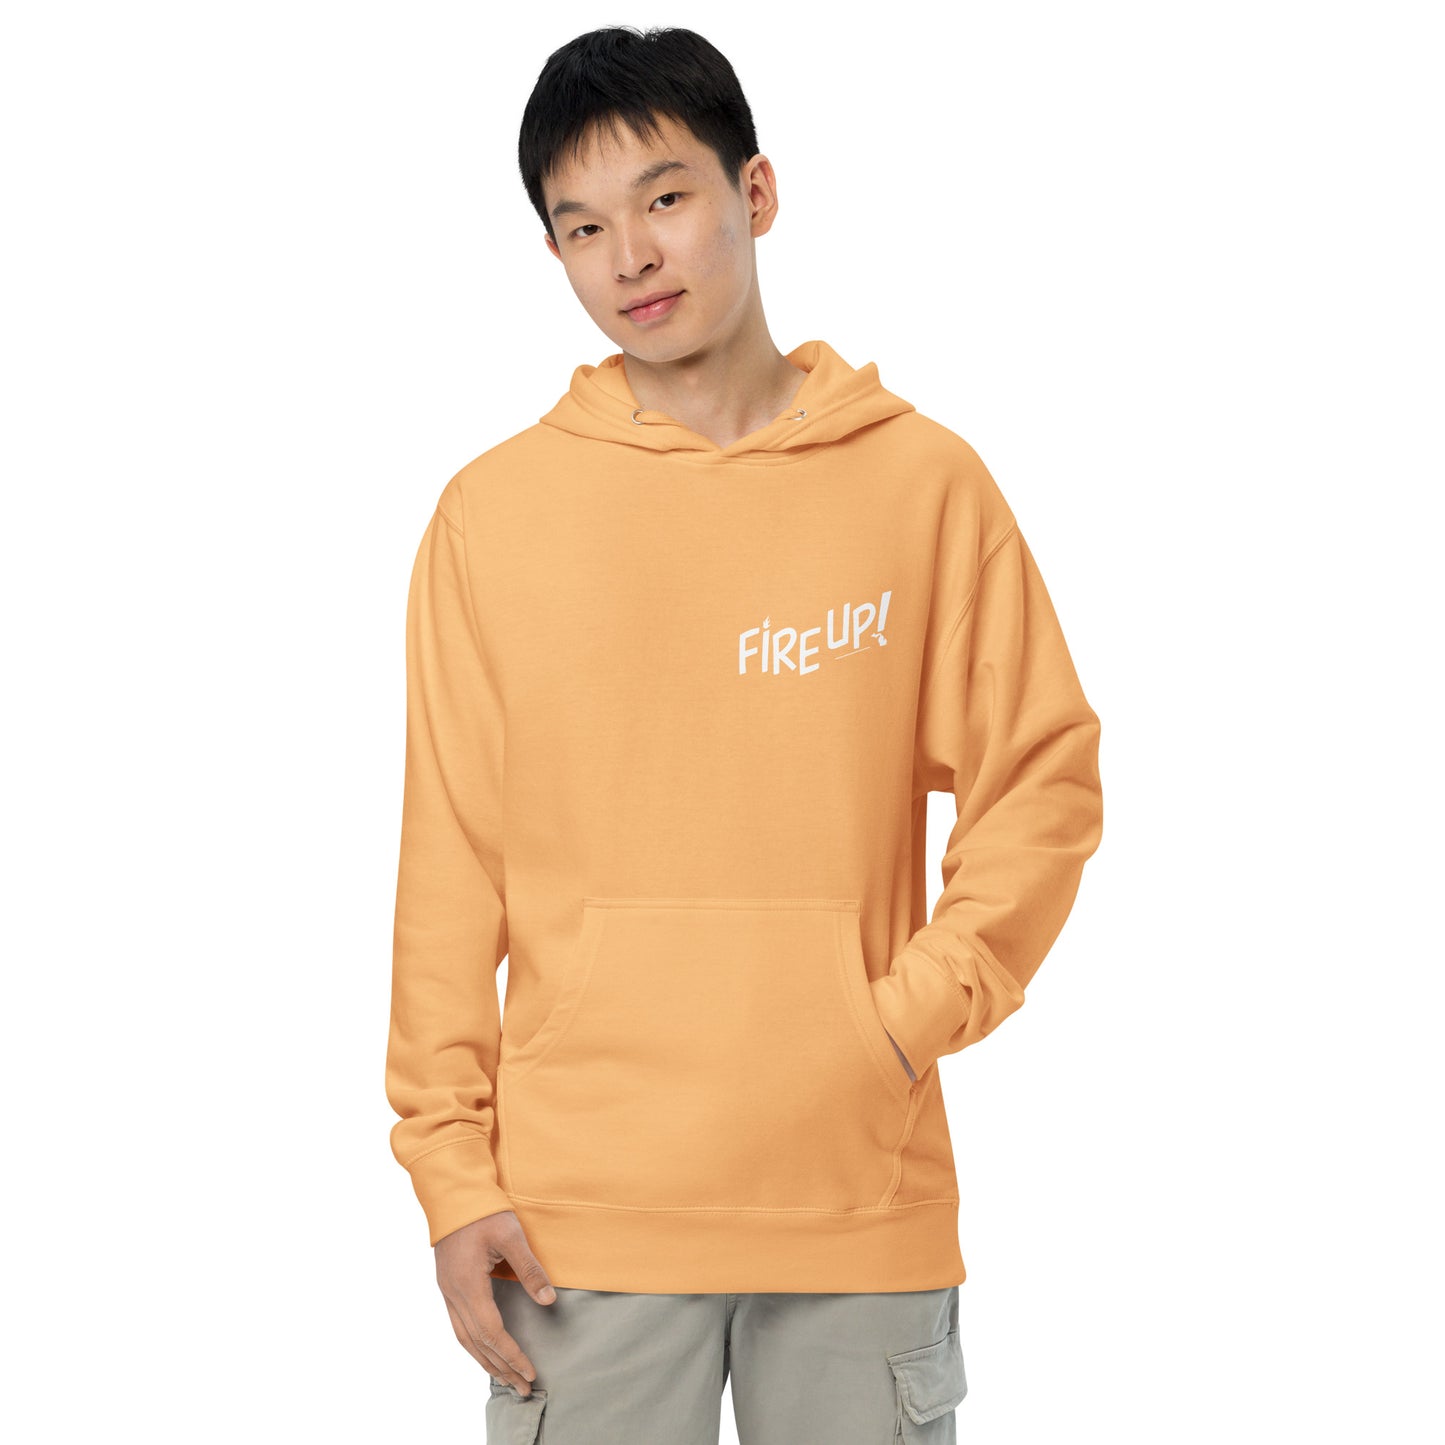 Fire Up! Pocket Unisex midweight hoodie